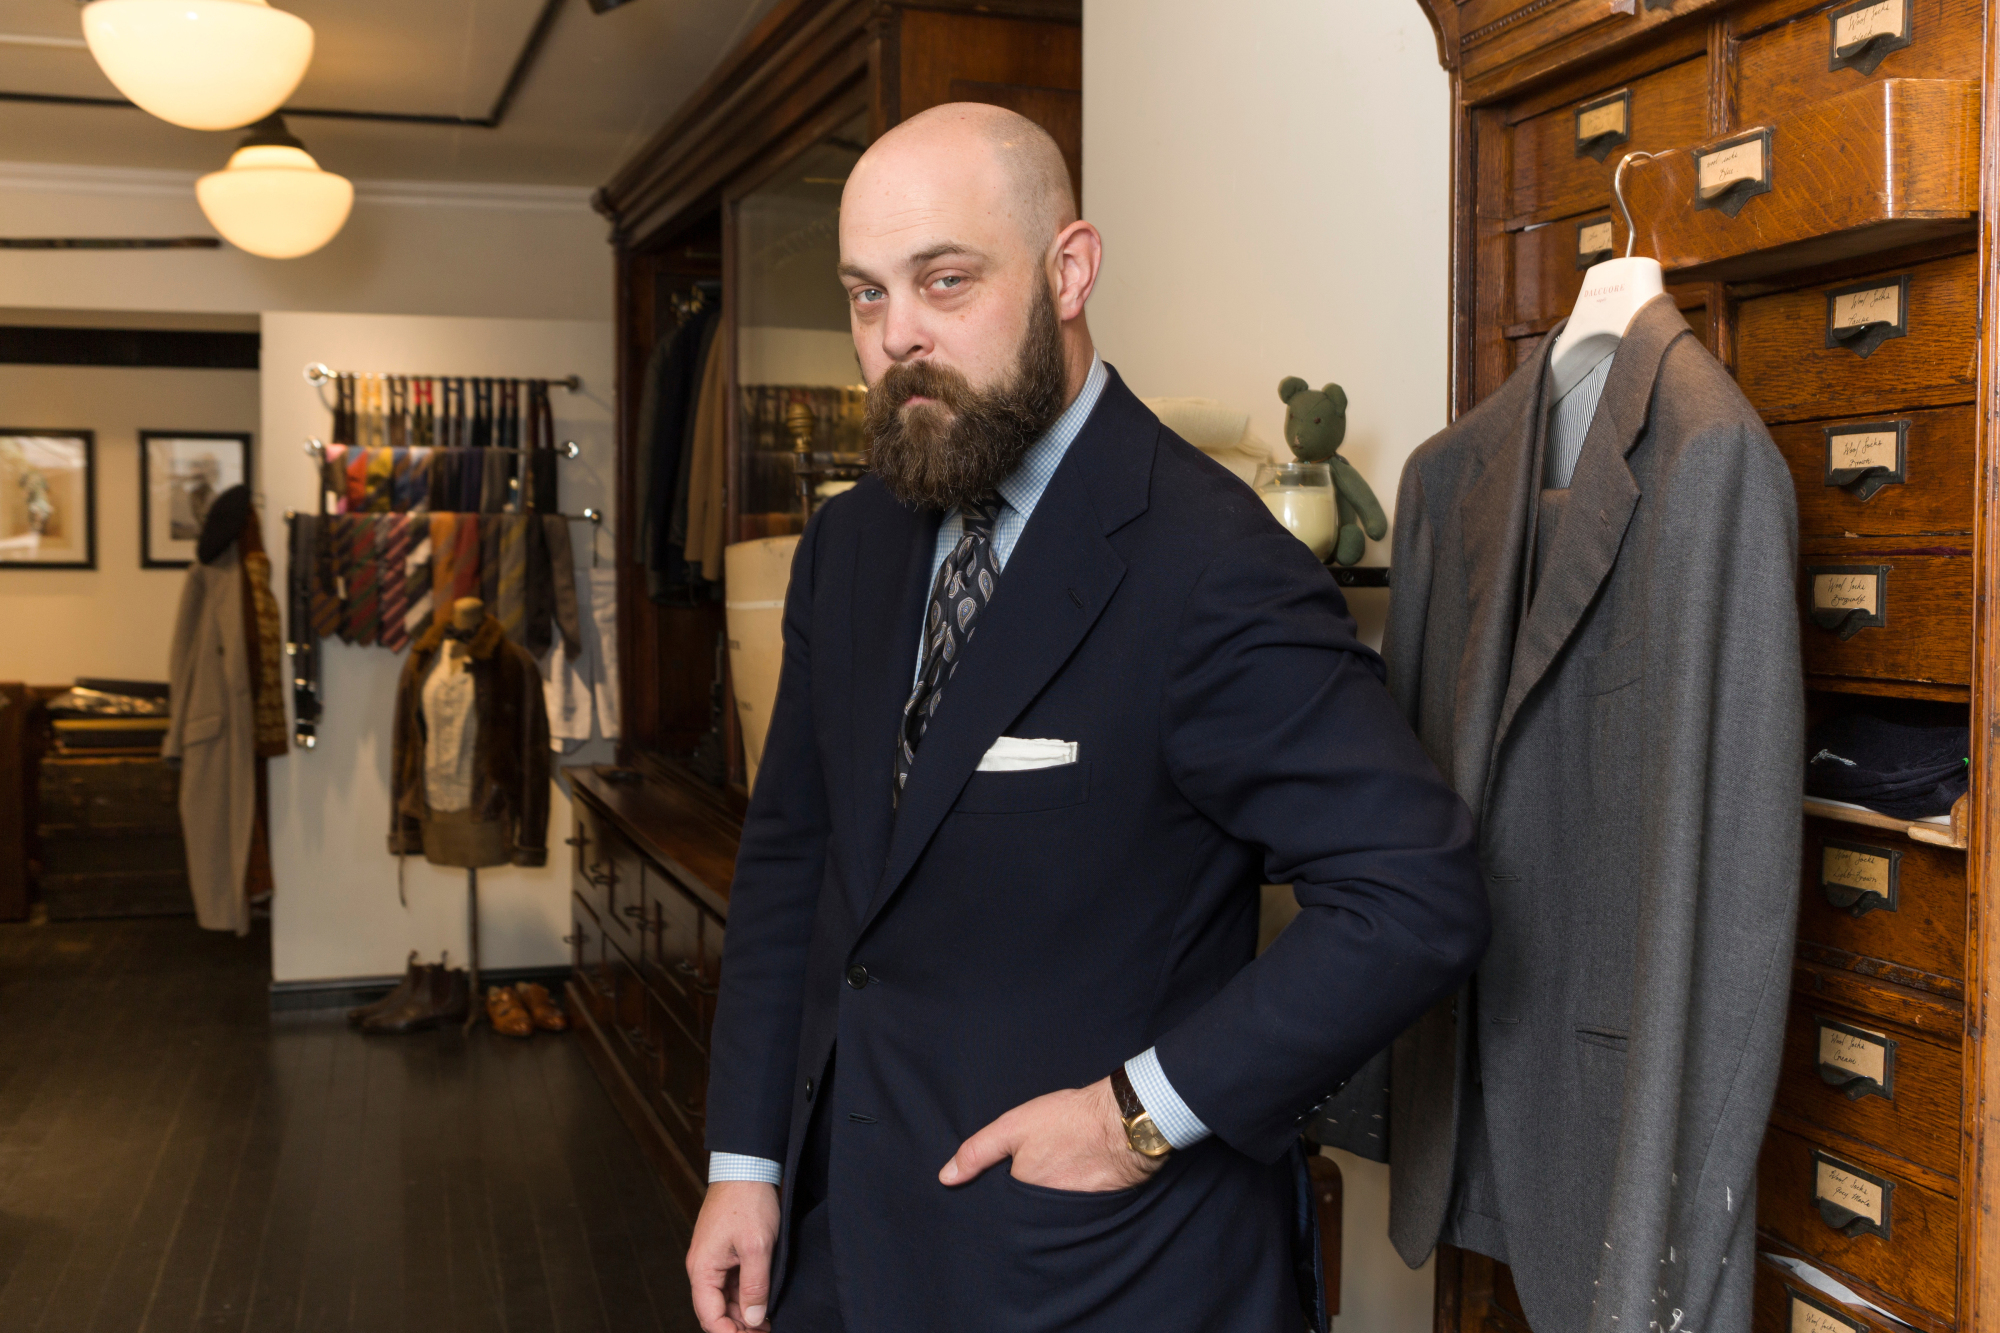 Style and substance: 'If only men who could would plan their wardrobes, and work with tailors, instead of asking their girlfriends what they should wear,' the world would be a better place, says Ethan Newton, proprietor of Bryceland's Tailors in the Jingumae district of Tokyo's Shibuya Ward. | CHRISTINA SJOGREN